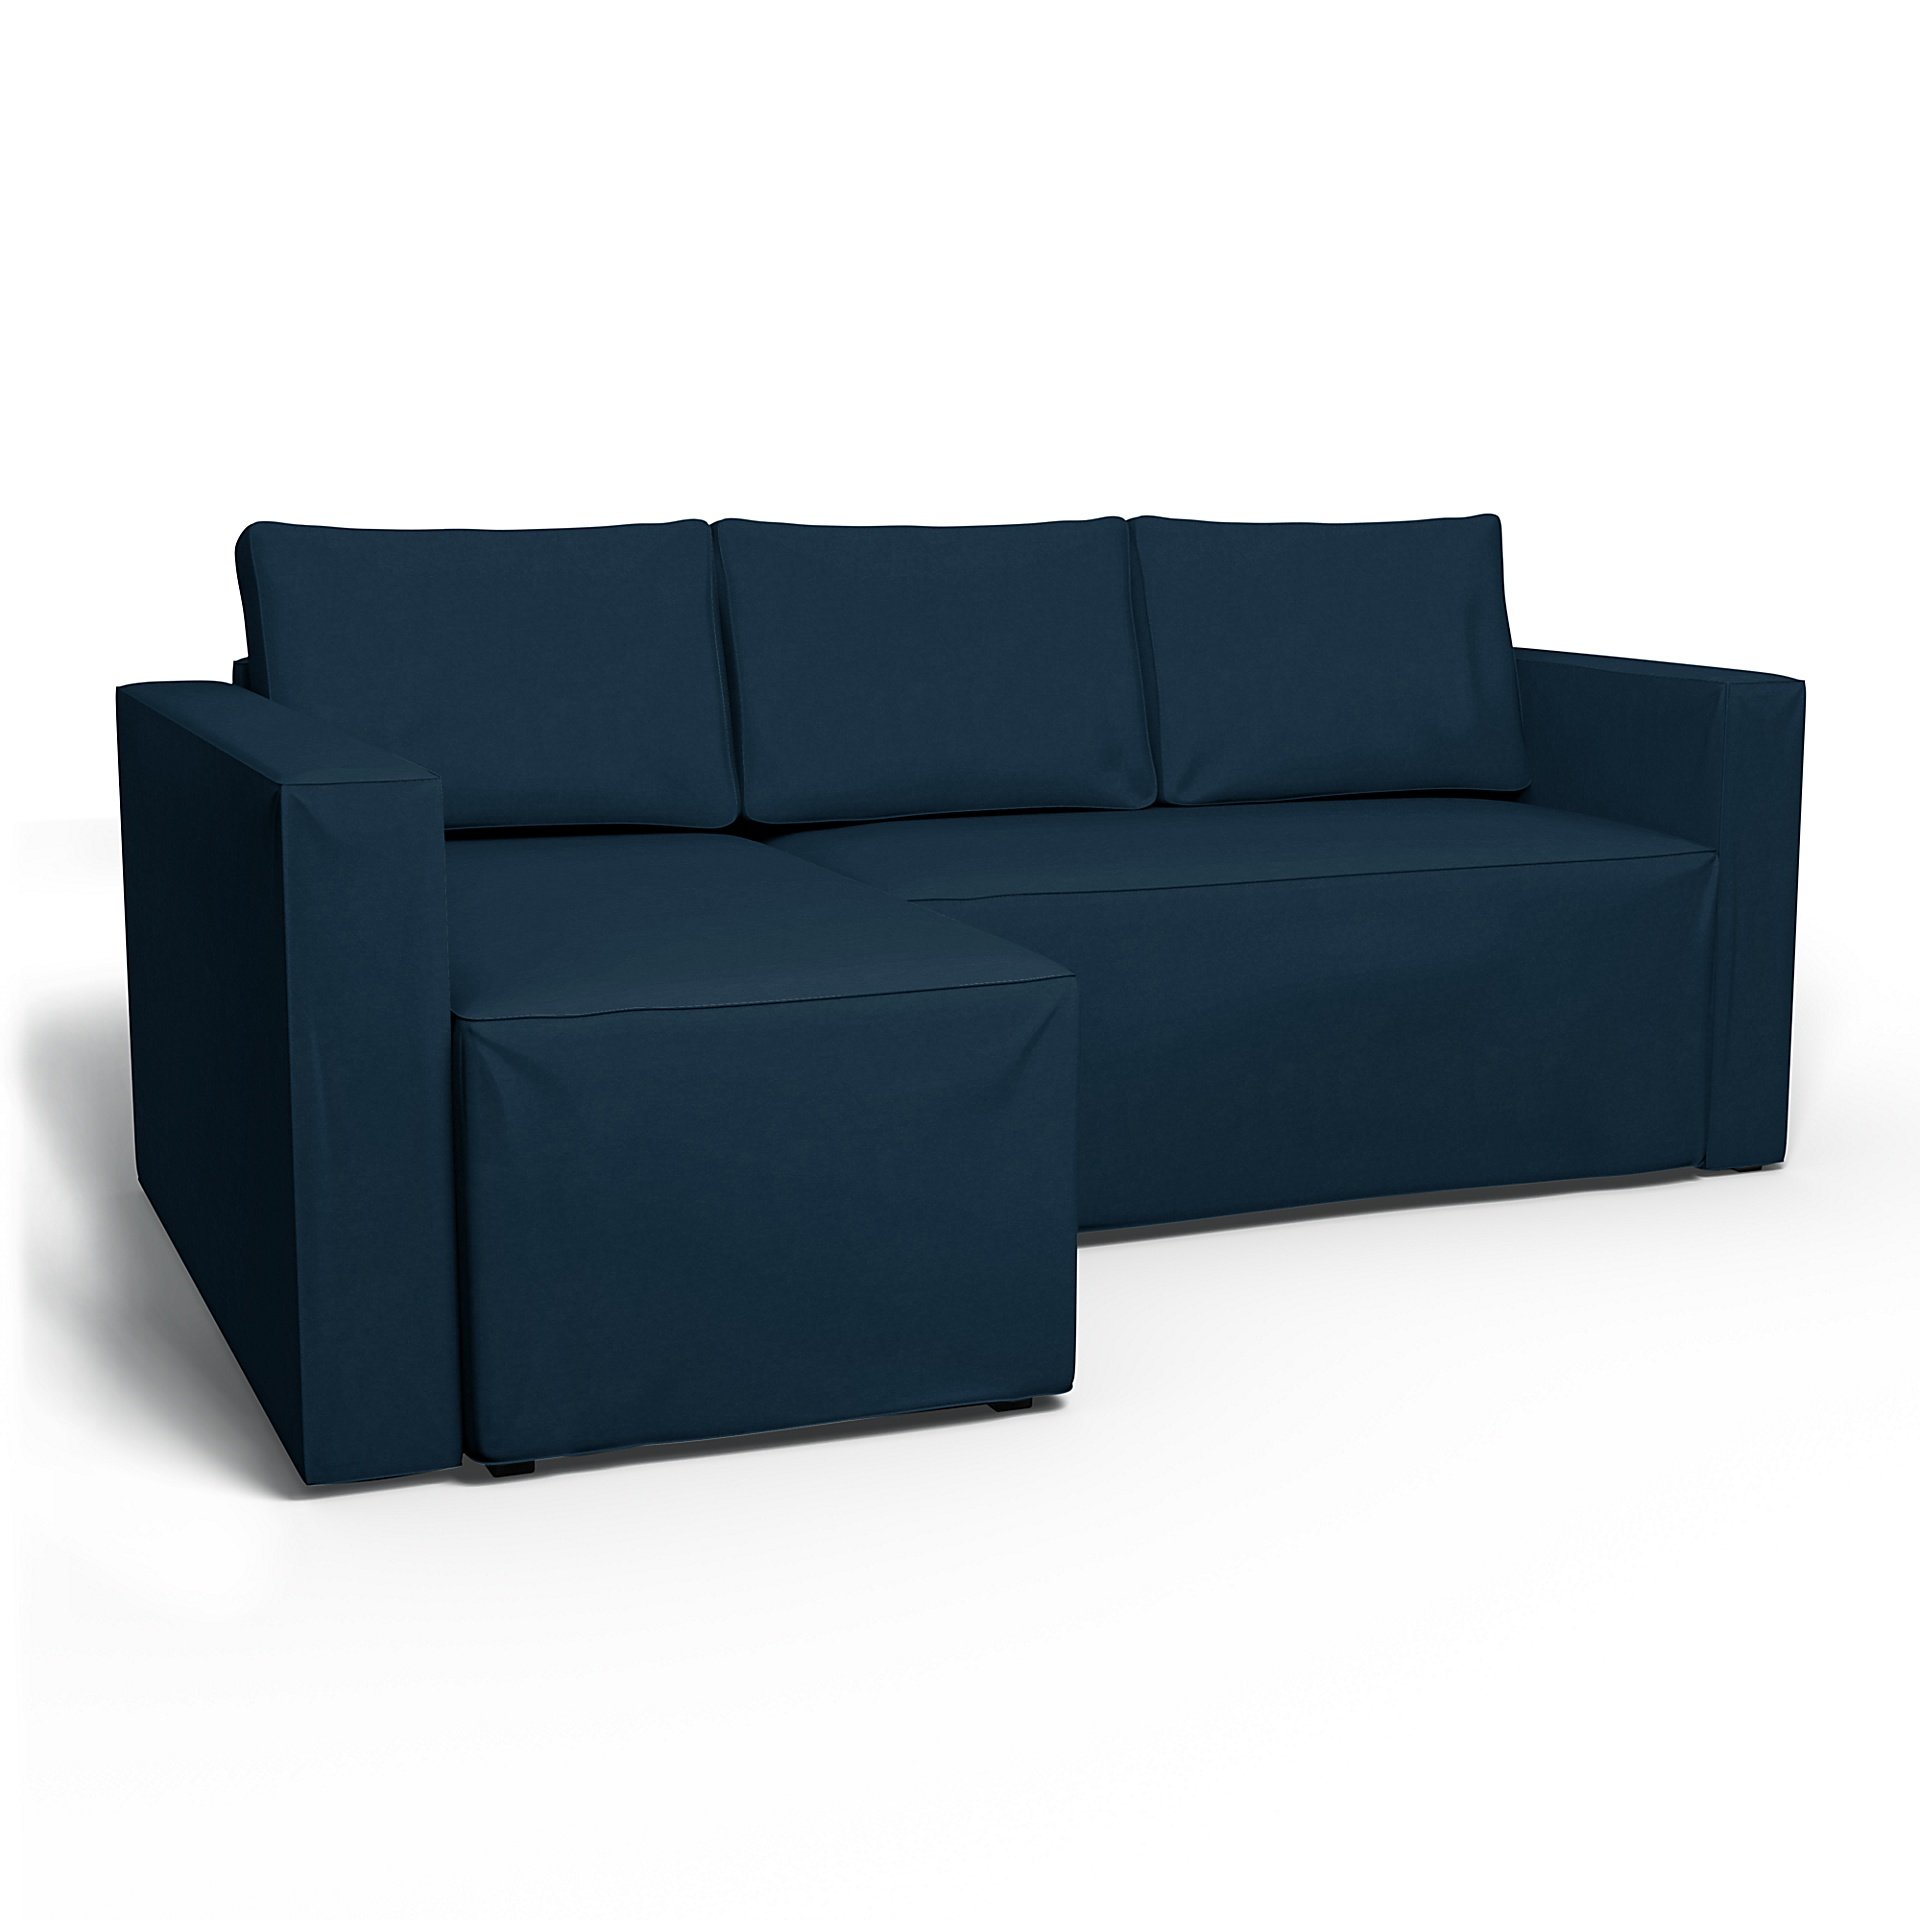 IKEA - Manstad Sofa Bed with Left Chaise Cover, Midnight, Velvet - Bemz